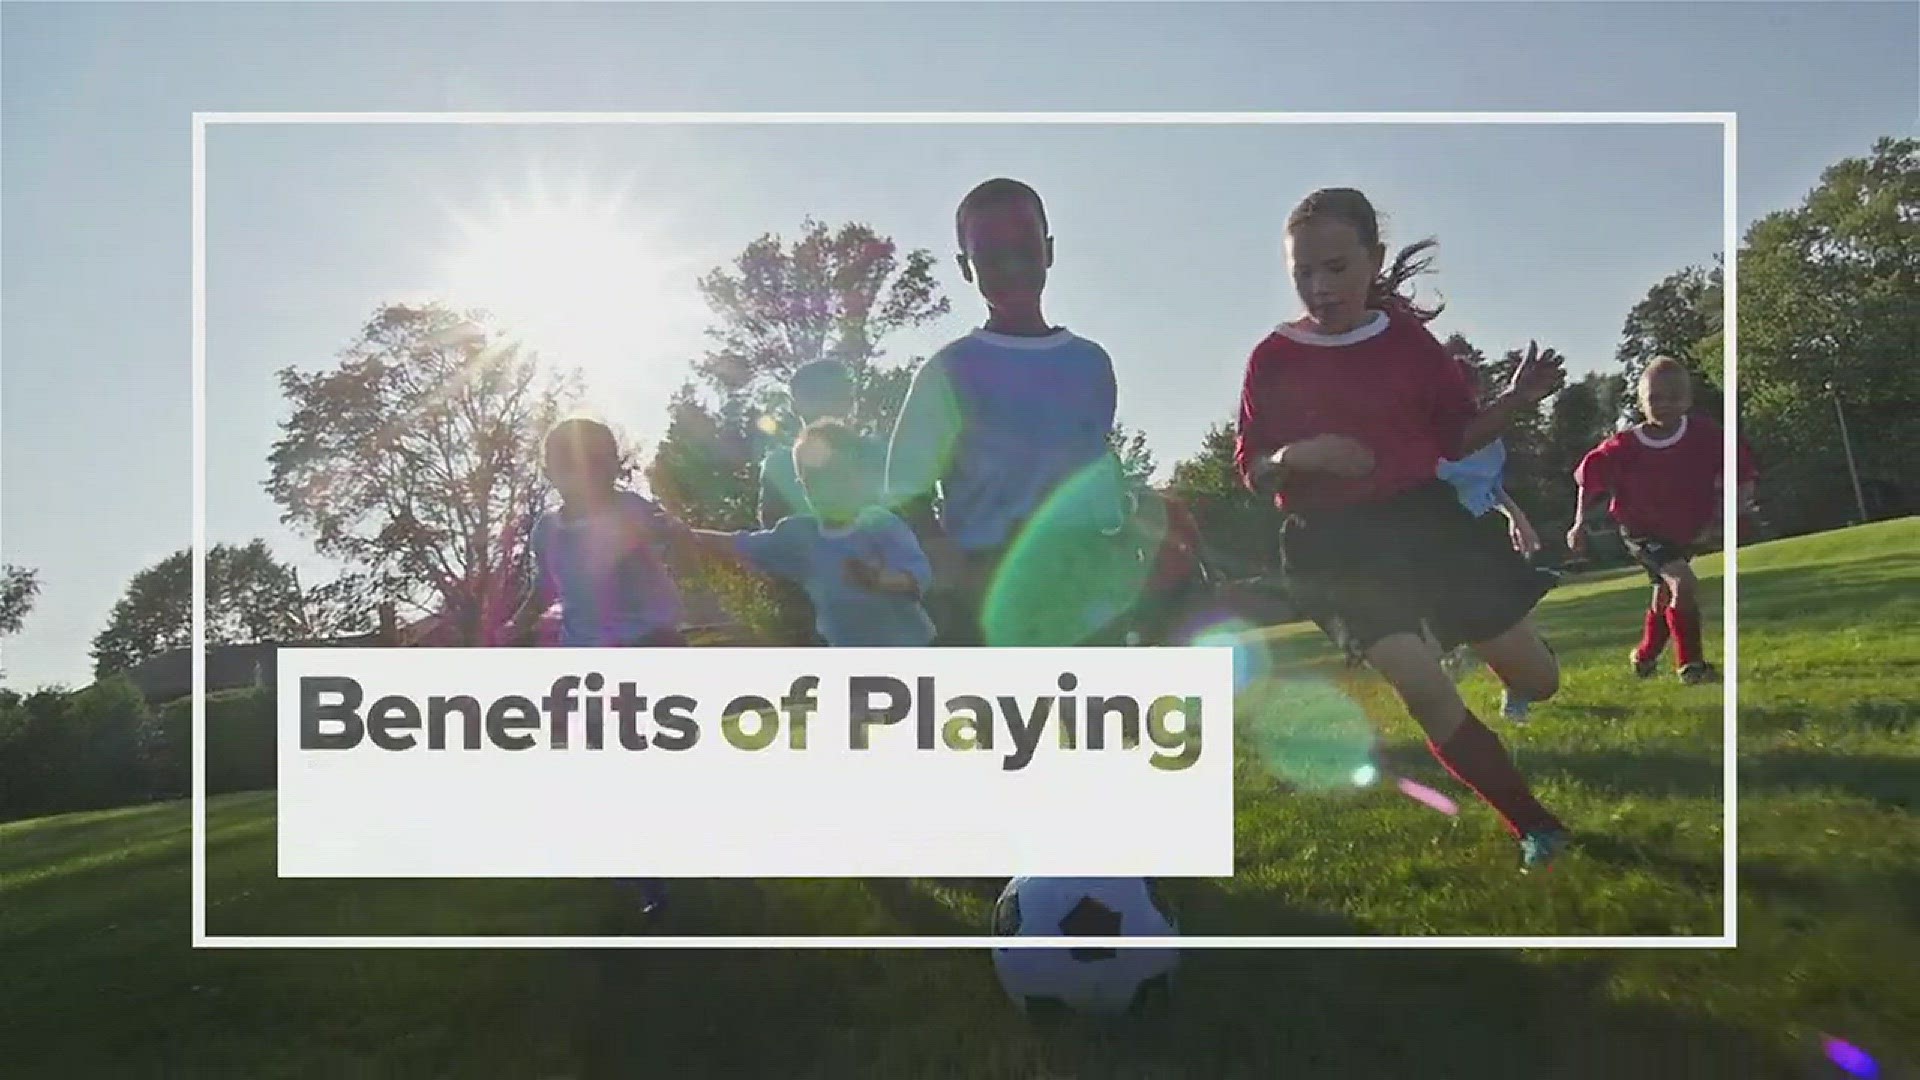 What are the benefits of playing youth sports? Dr. Troy Smurawa explains.